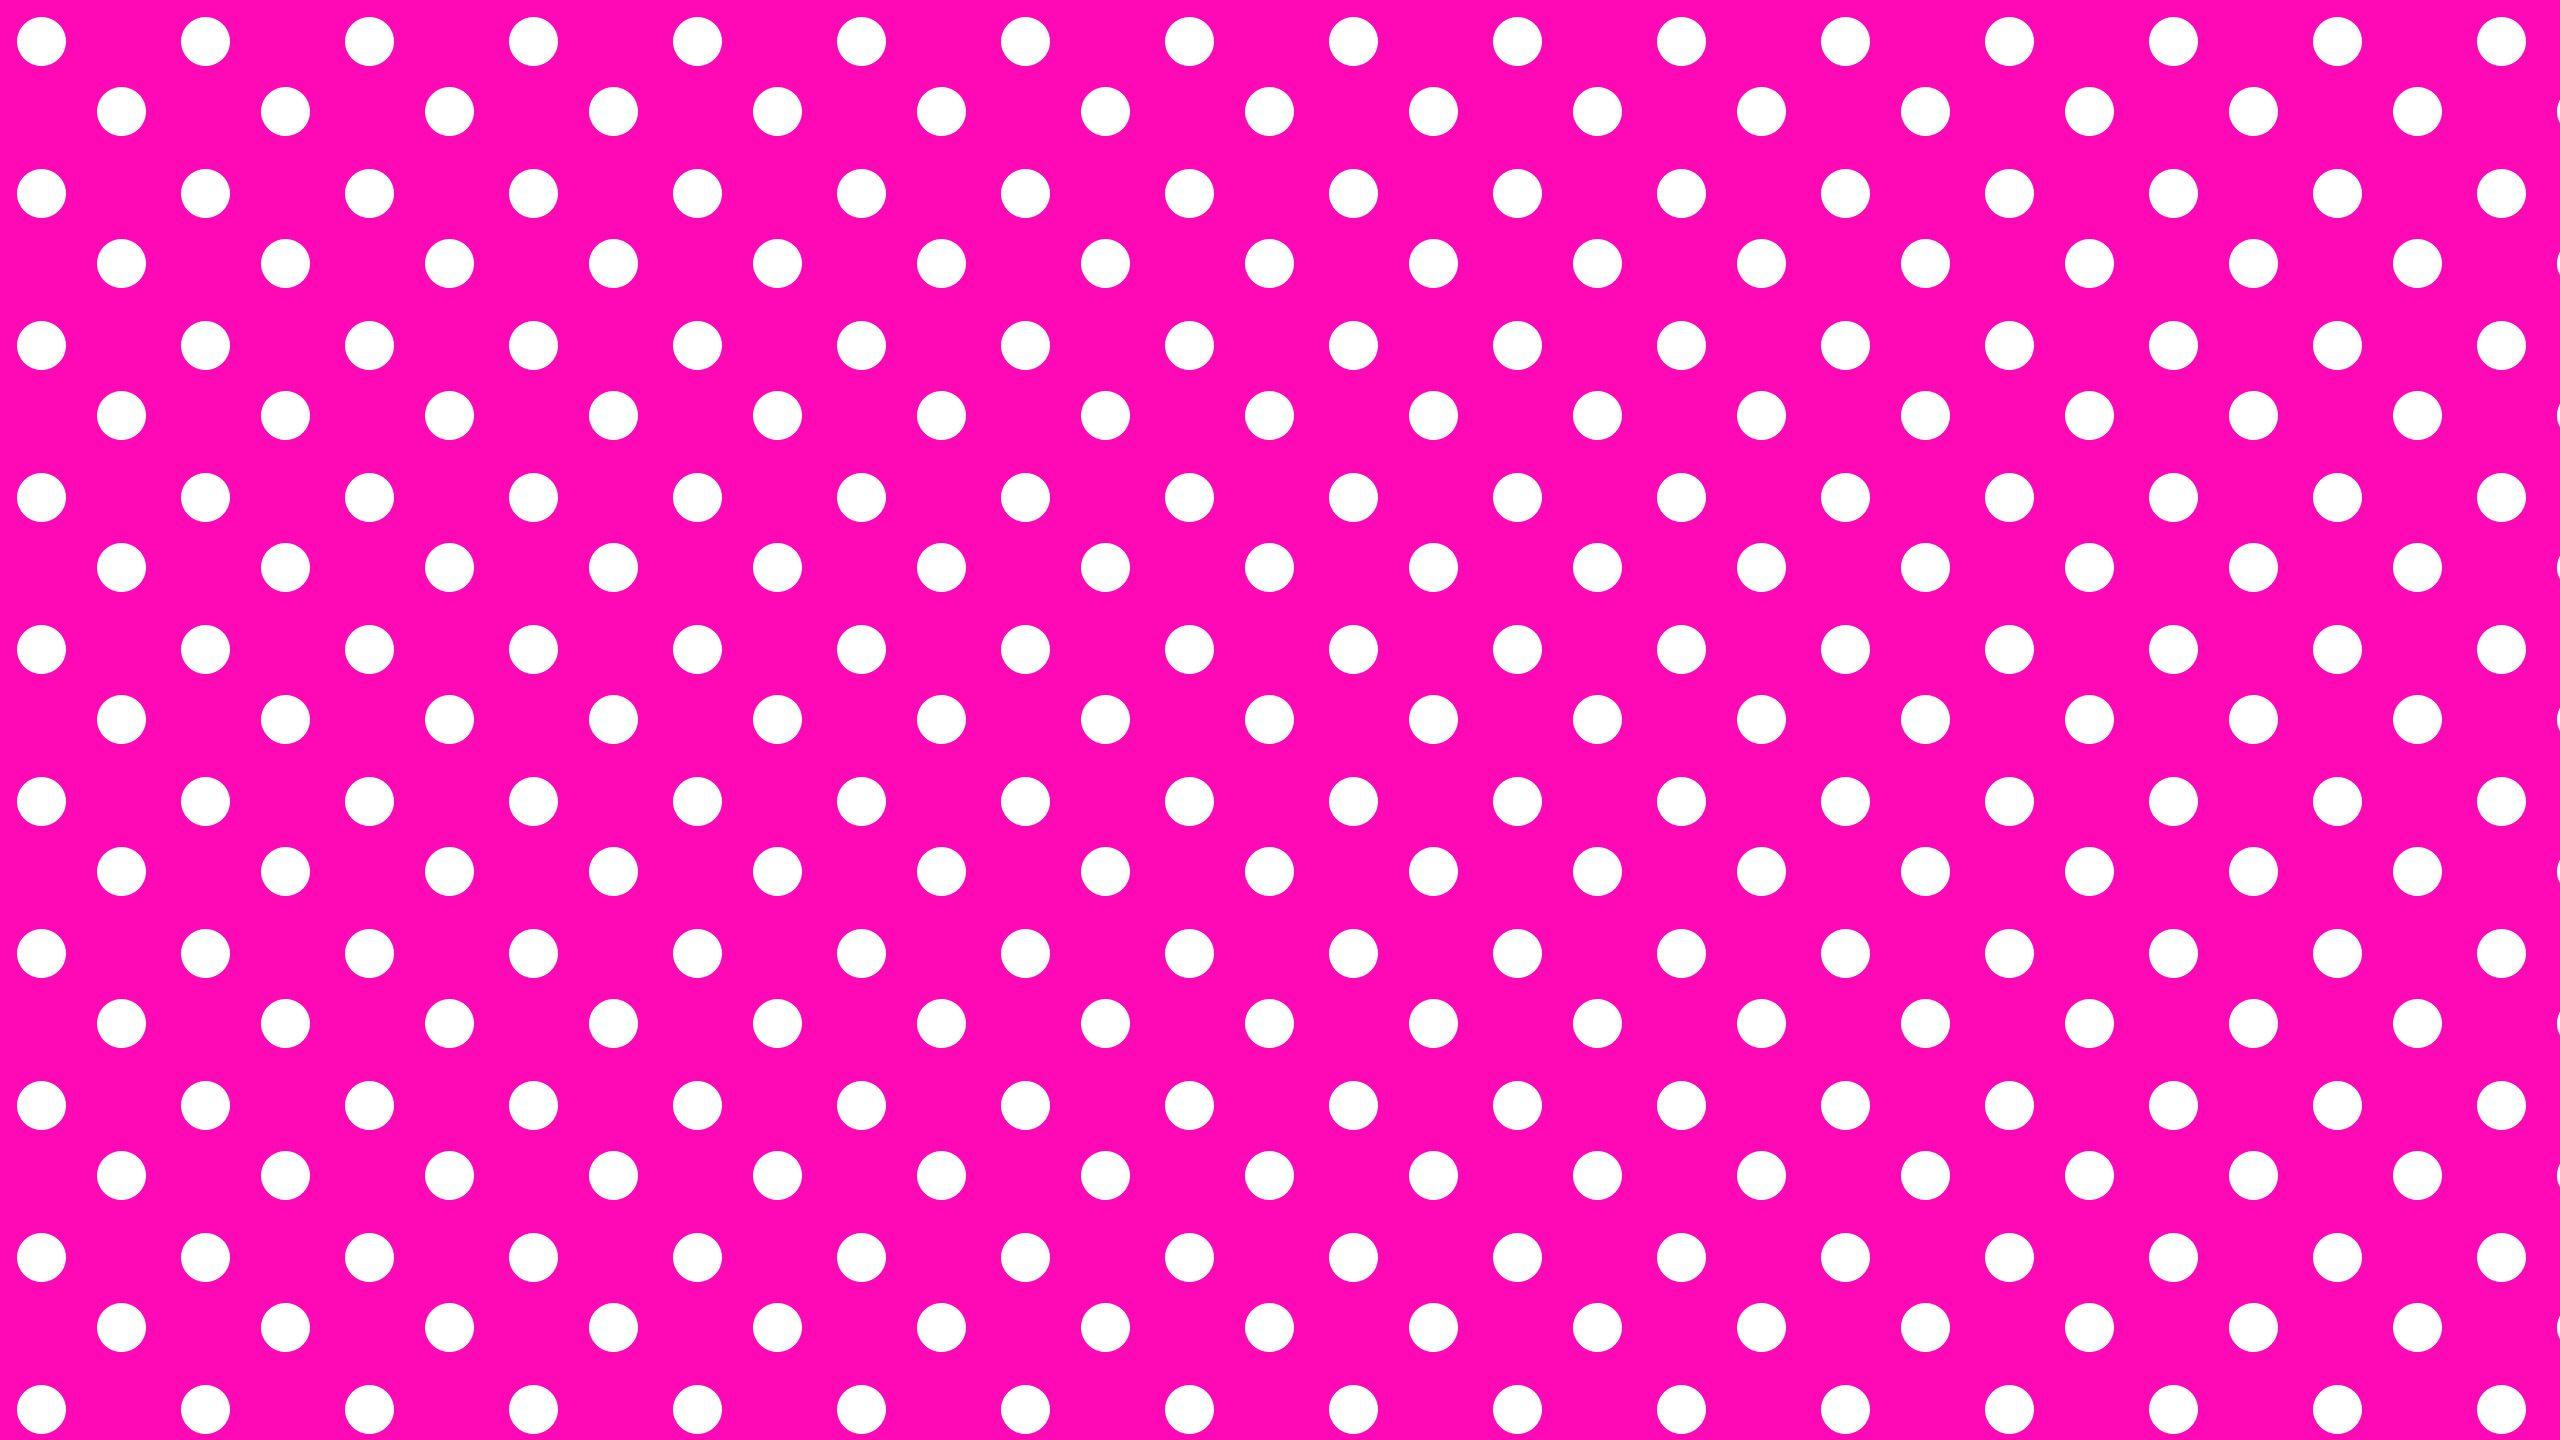 Minnie Mouse Pink Polka Dot Background Carrotapp 